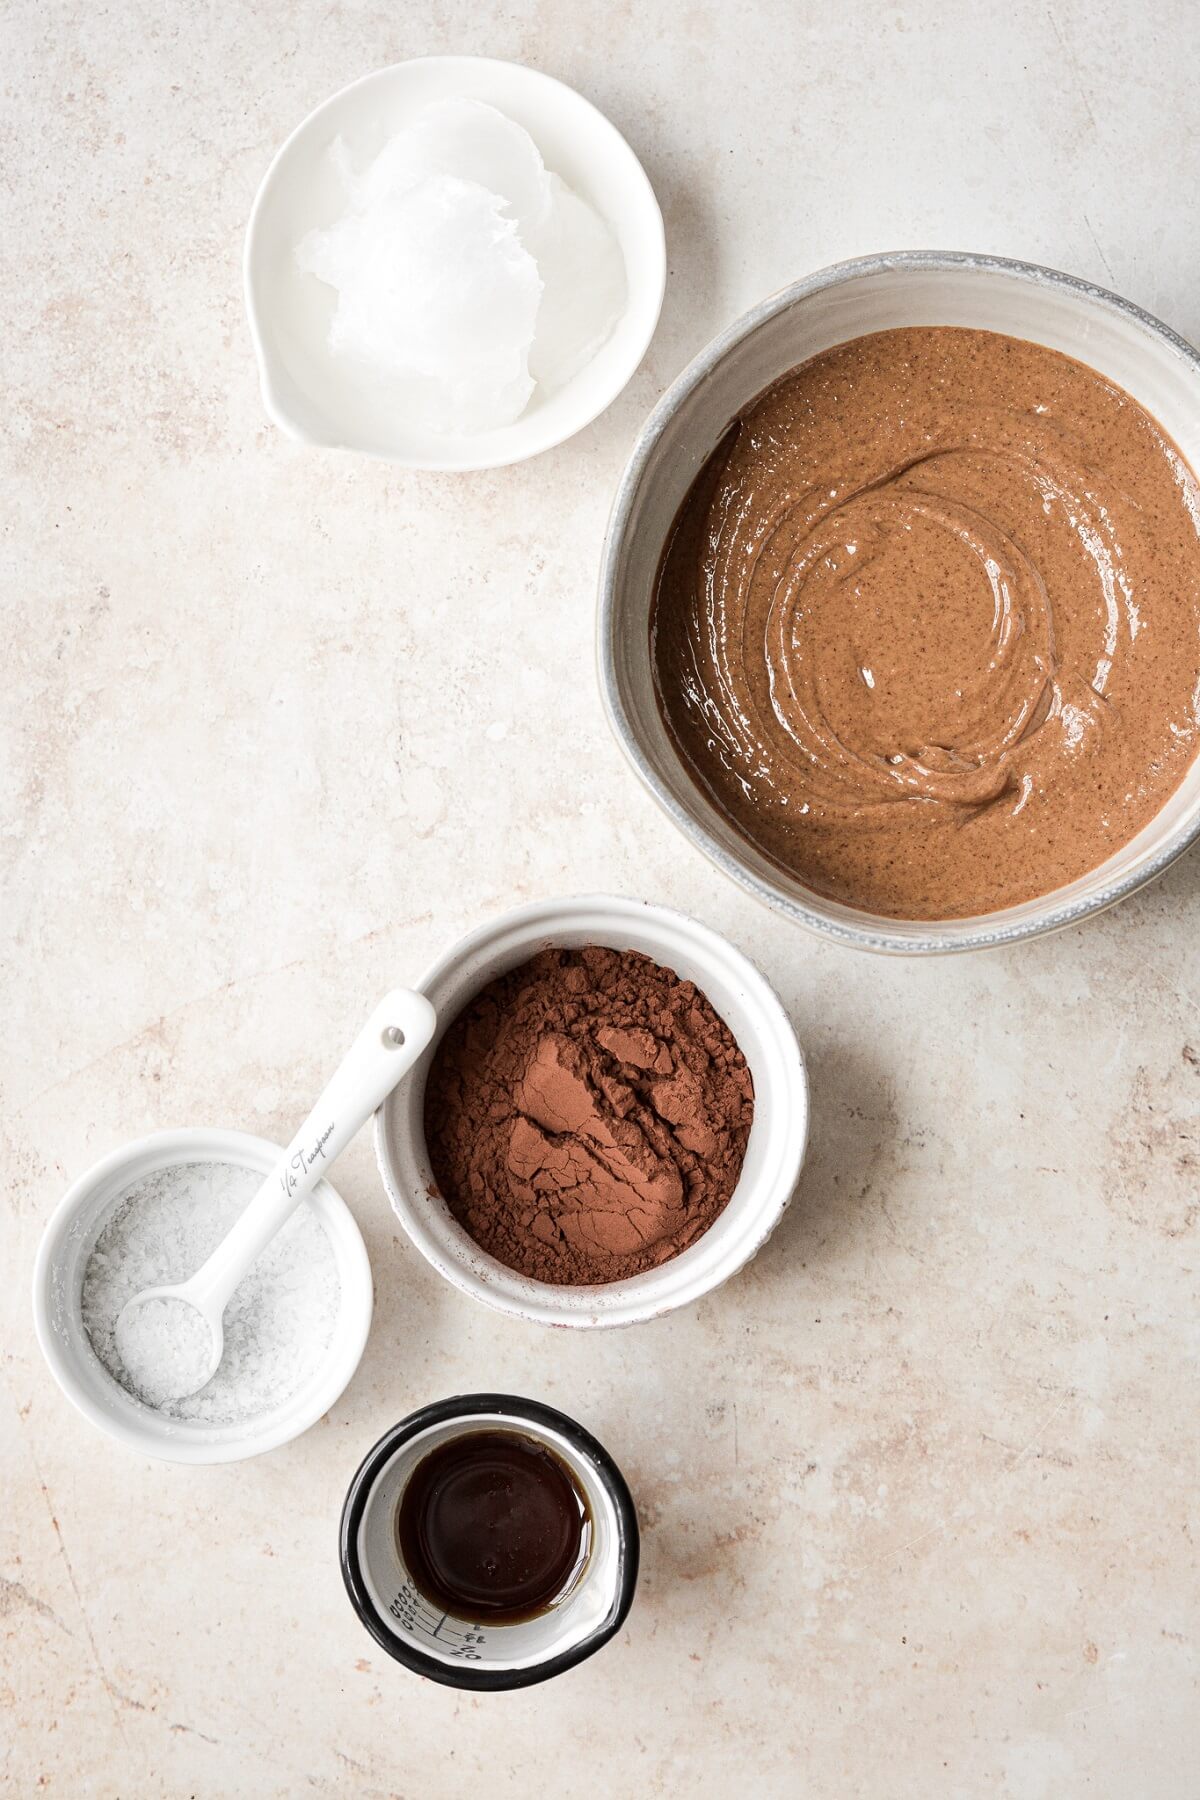 Ingredients for making frozen chocolate almond butter bites.